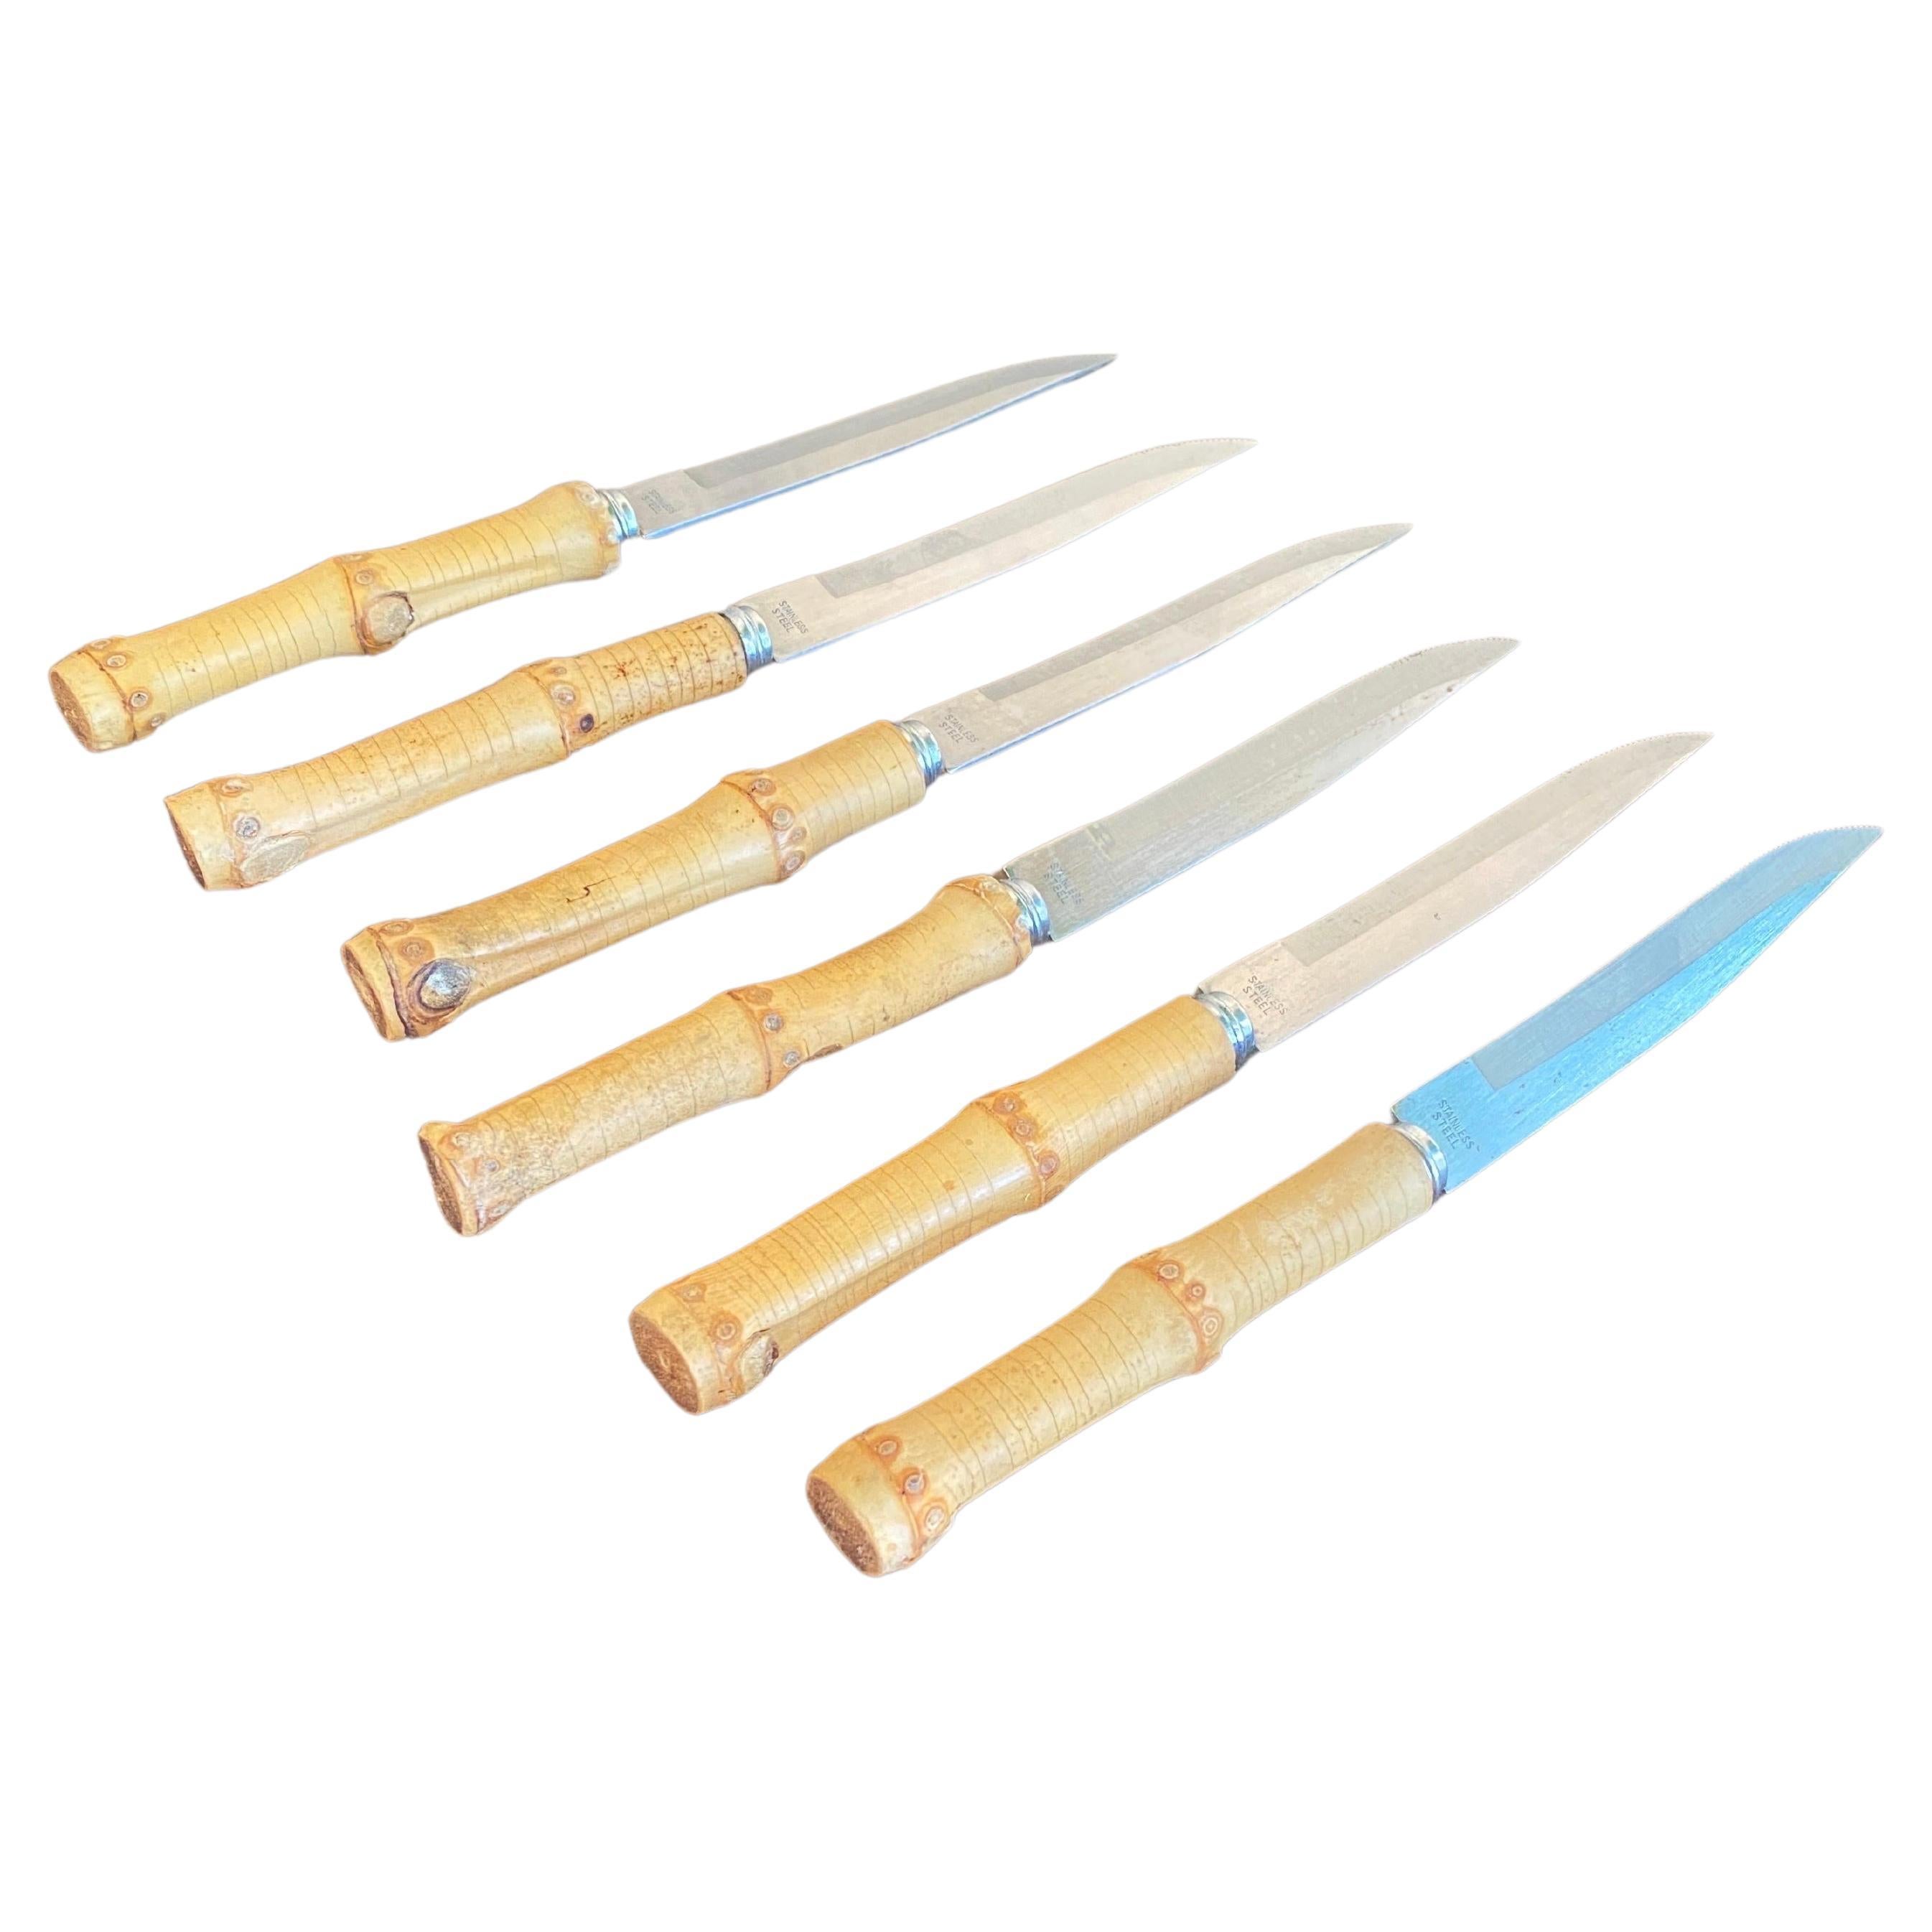 Bamboo Cheese Knifes, Small, Set of 6, Brown Color, France  circa 1960